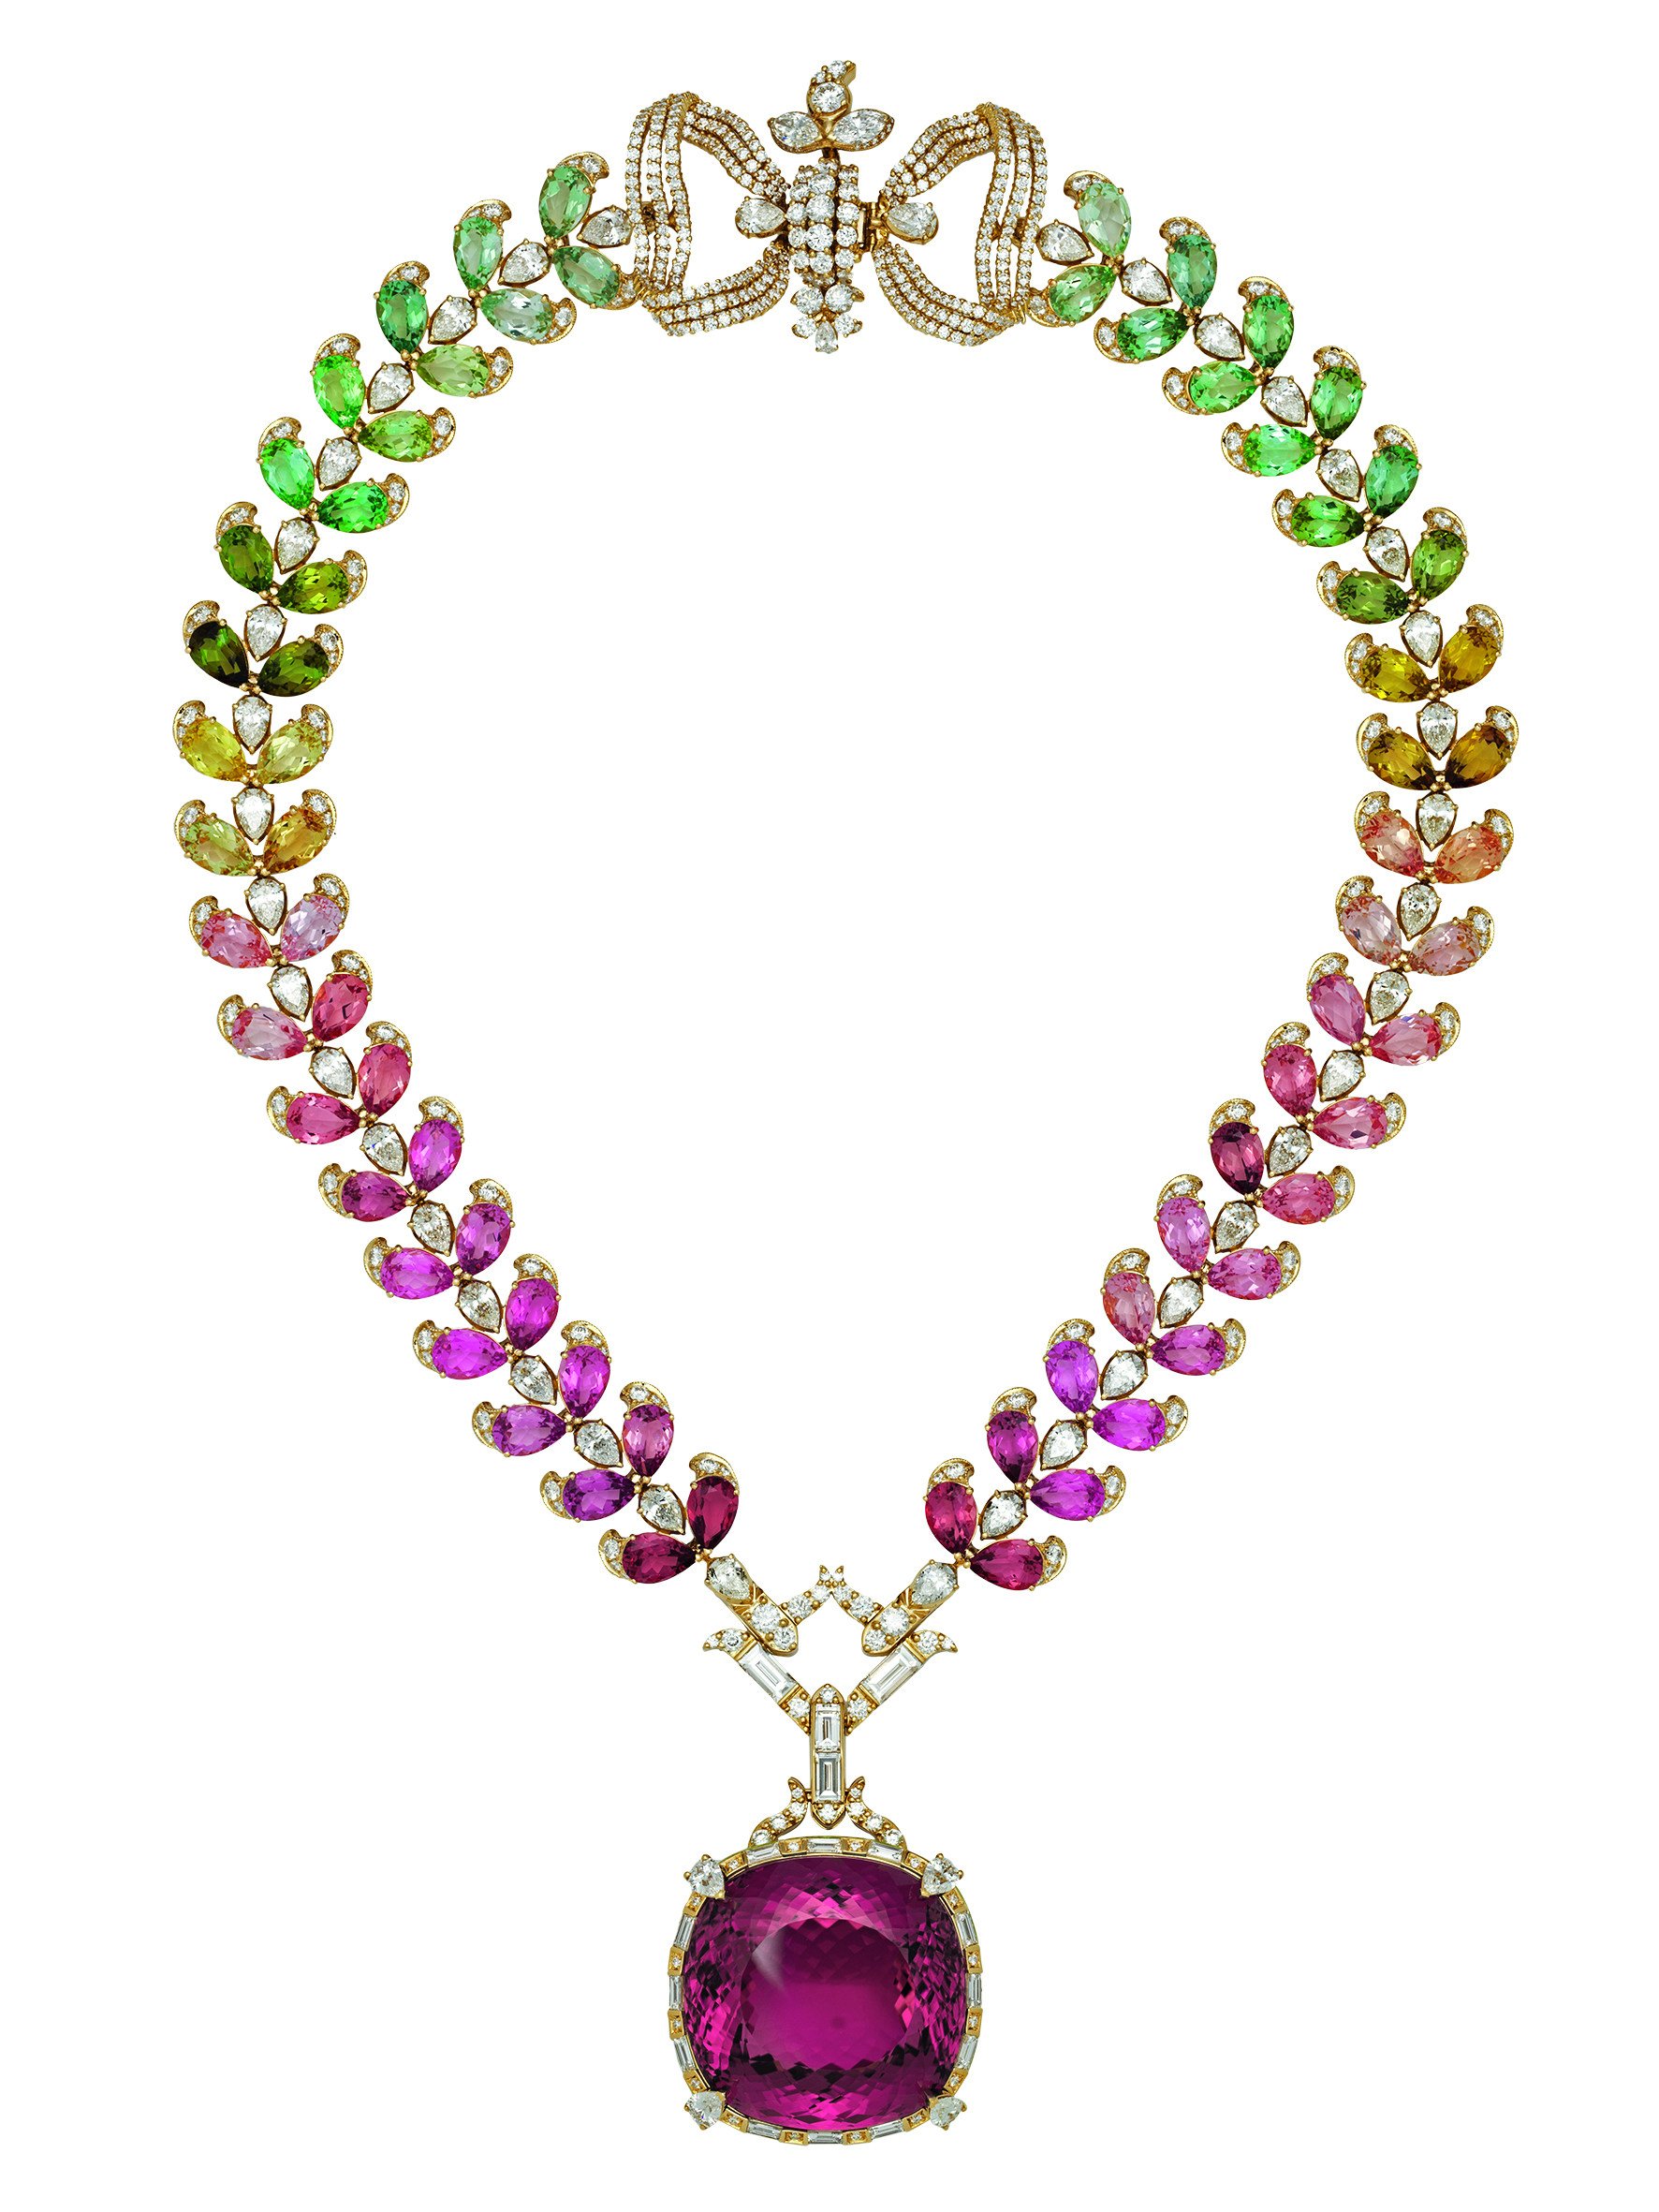 Hottest luxury necklaces 2022 from Gucci to Dior and Chanel and